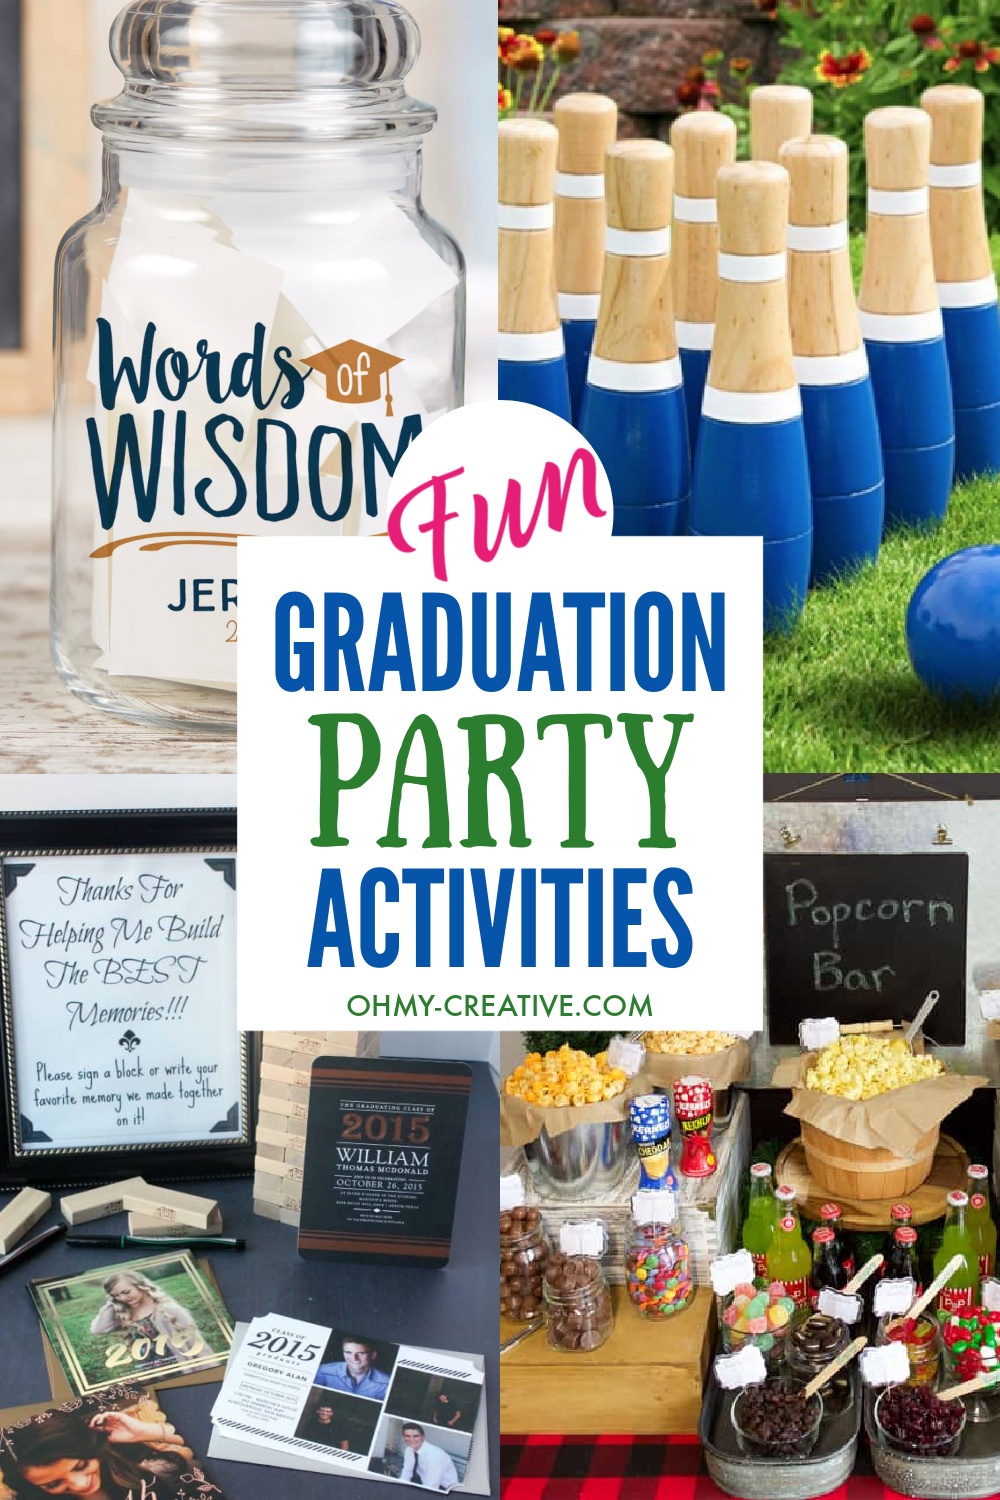 A collage of fun graduation party activities for friends and family!